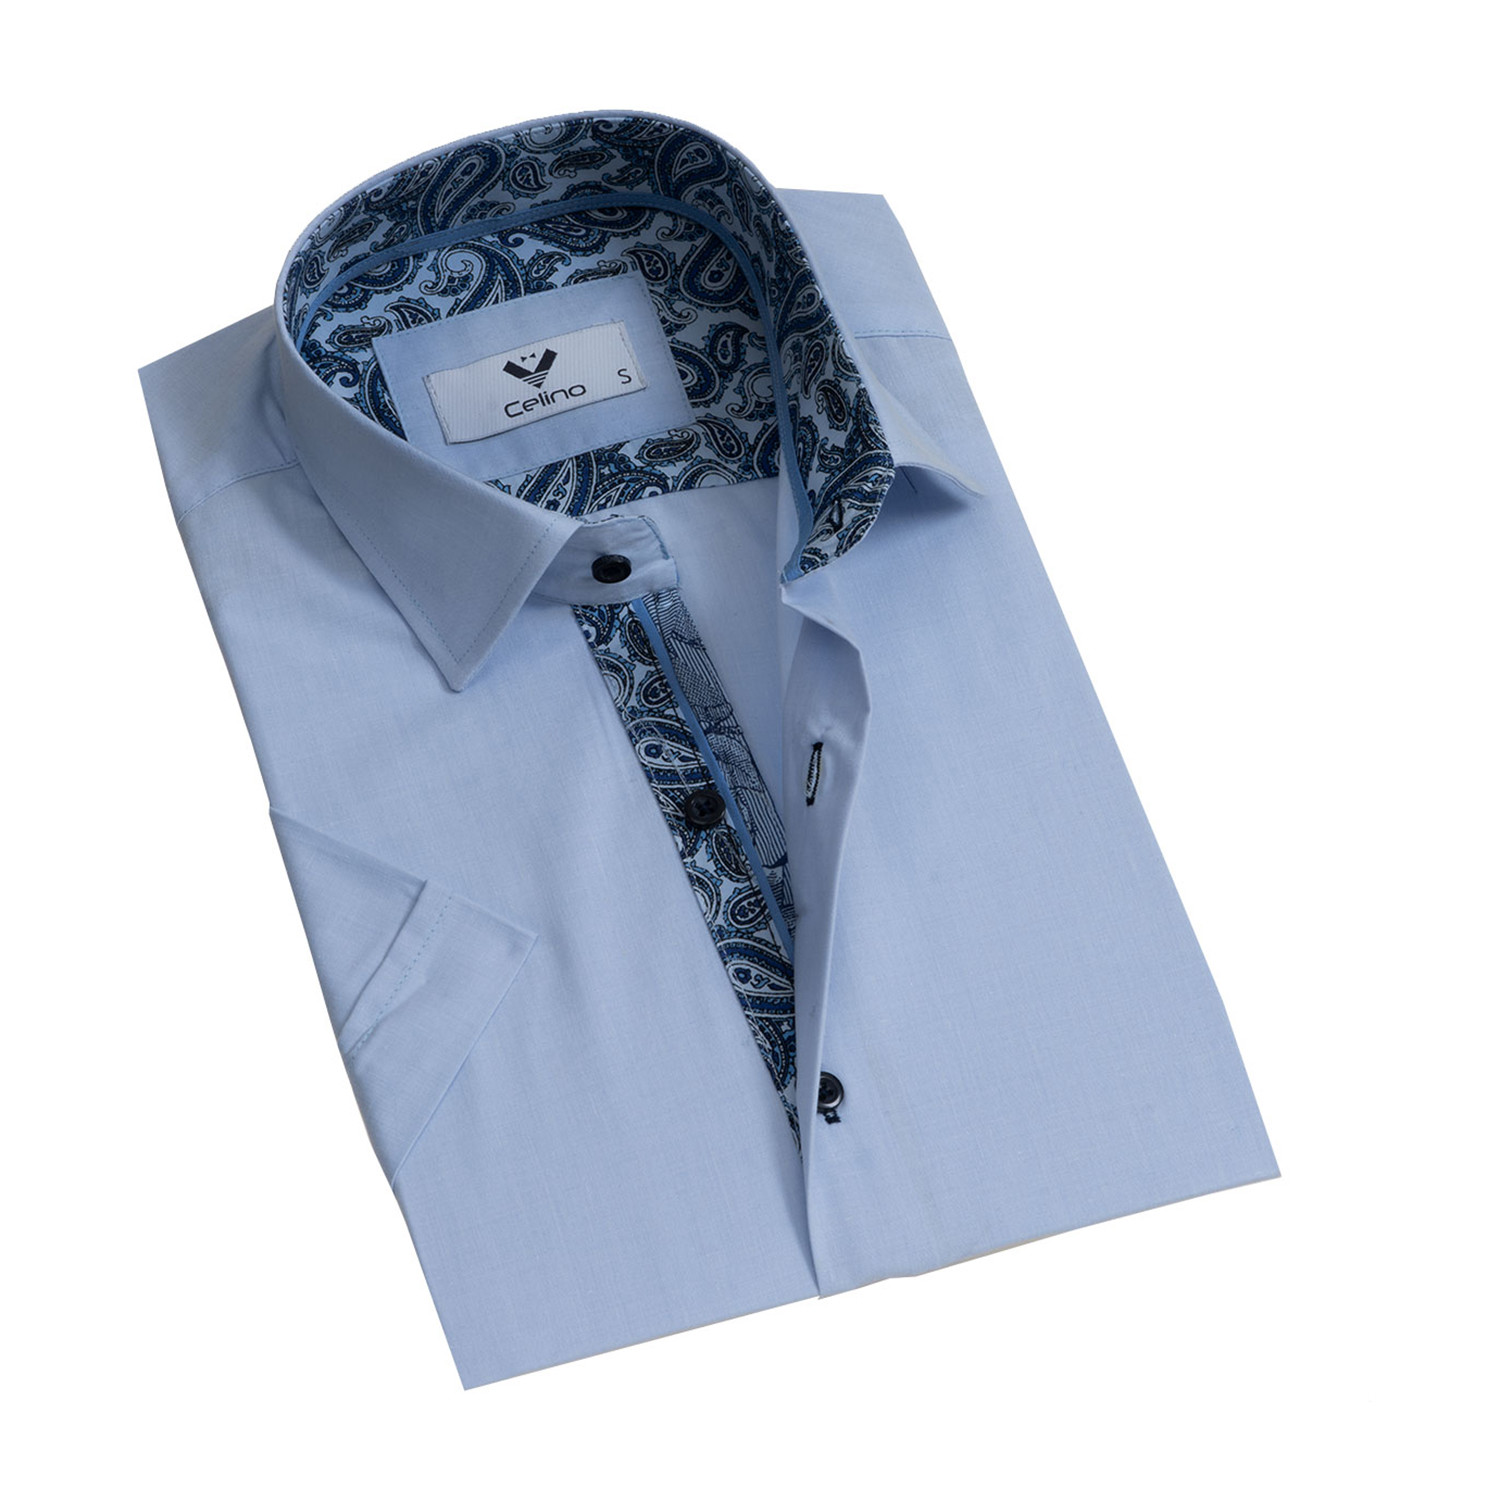 Short-Sleeve Button Up // Solid Light Blue (3XL) - Celino - Touch of Modern